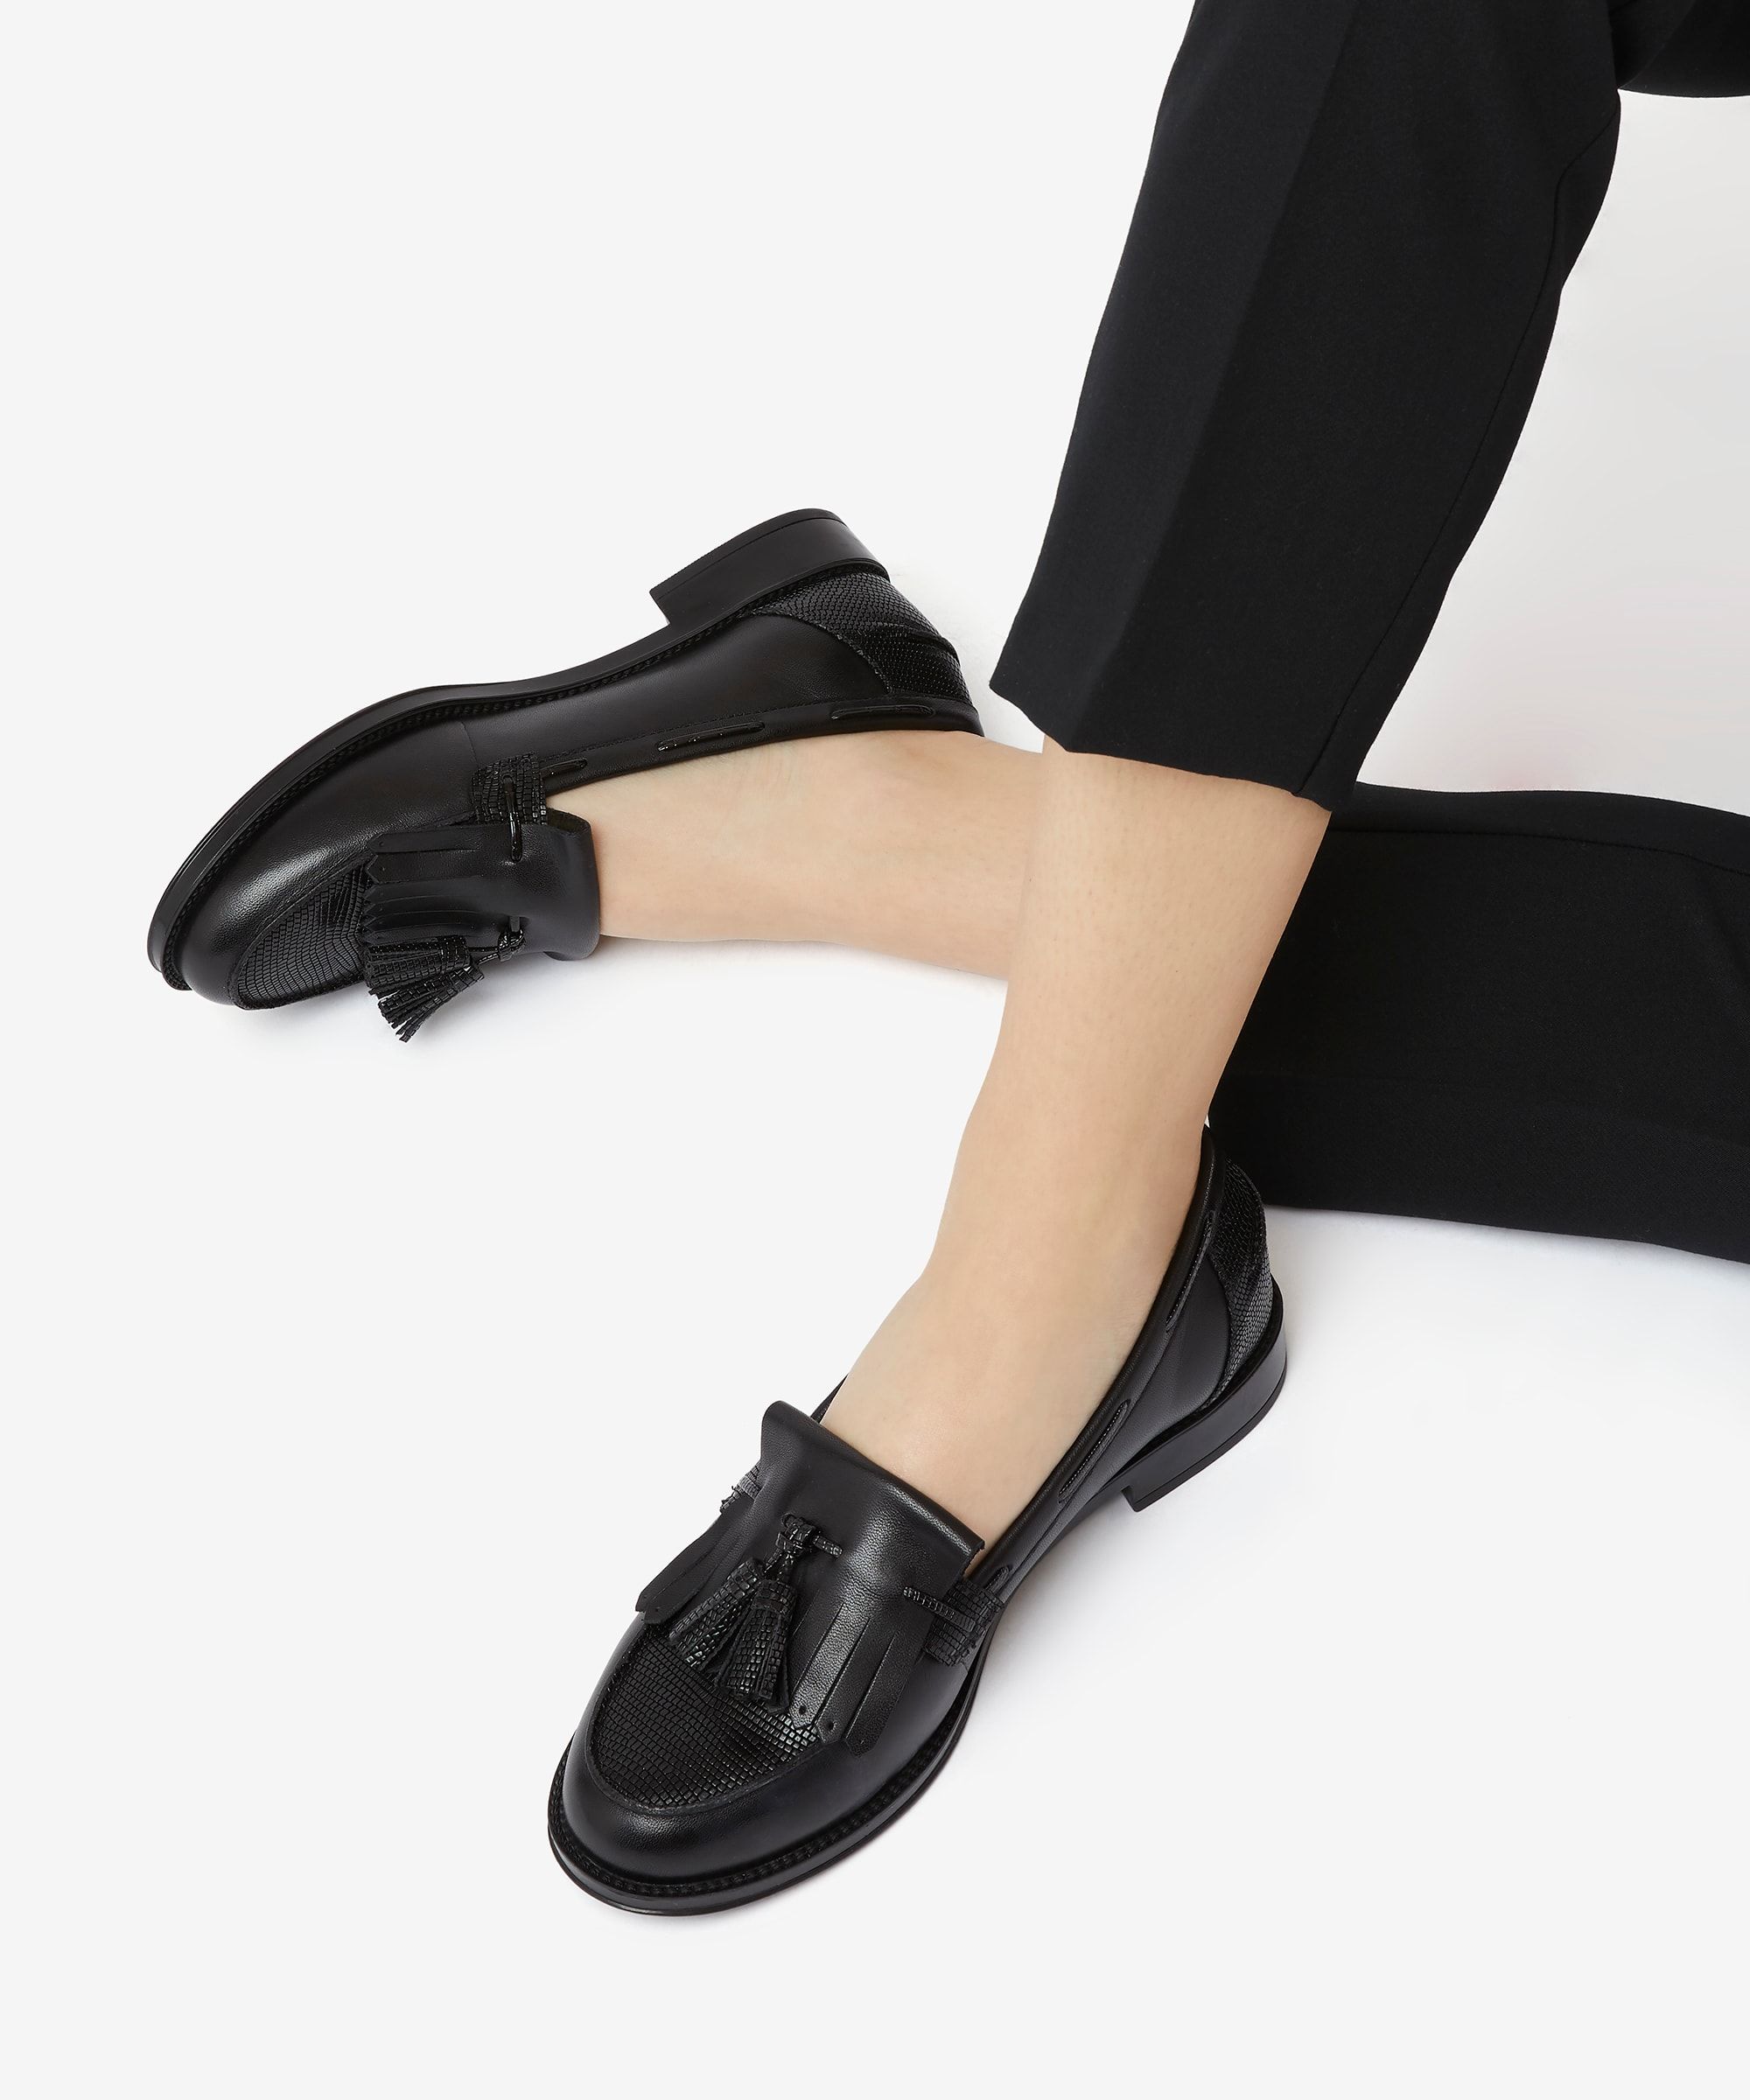 Loafers are a classic for work and weekends, and this style is one of our favourites. Pairing best with preppy looks, this smart pair features textured panels and a tassel trim.